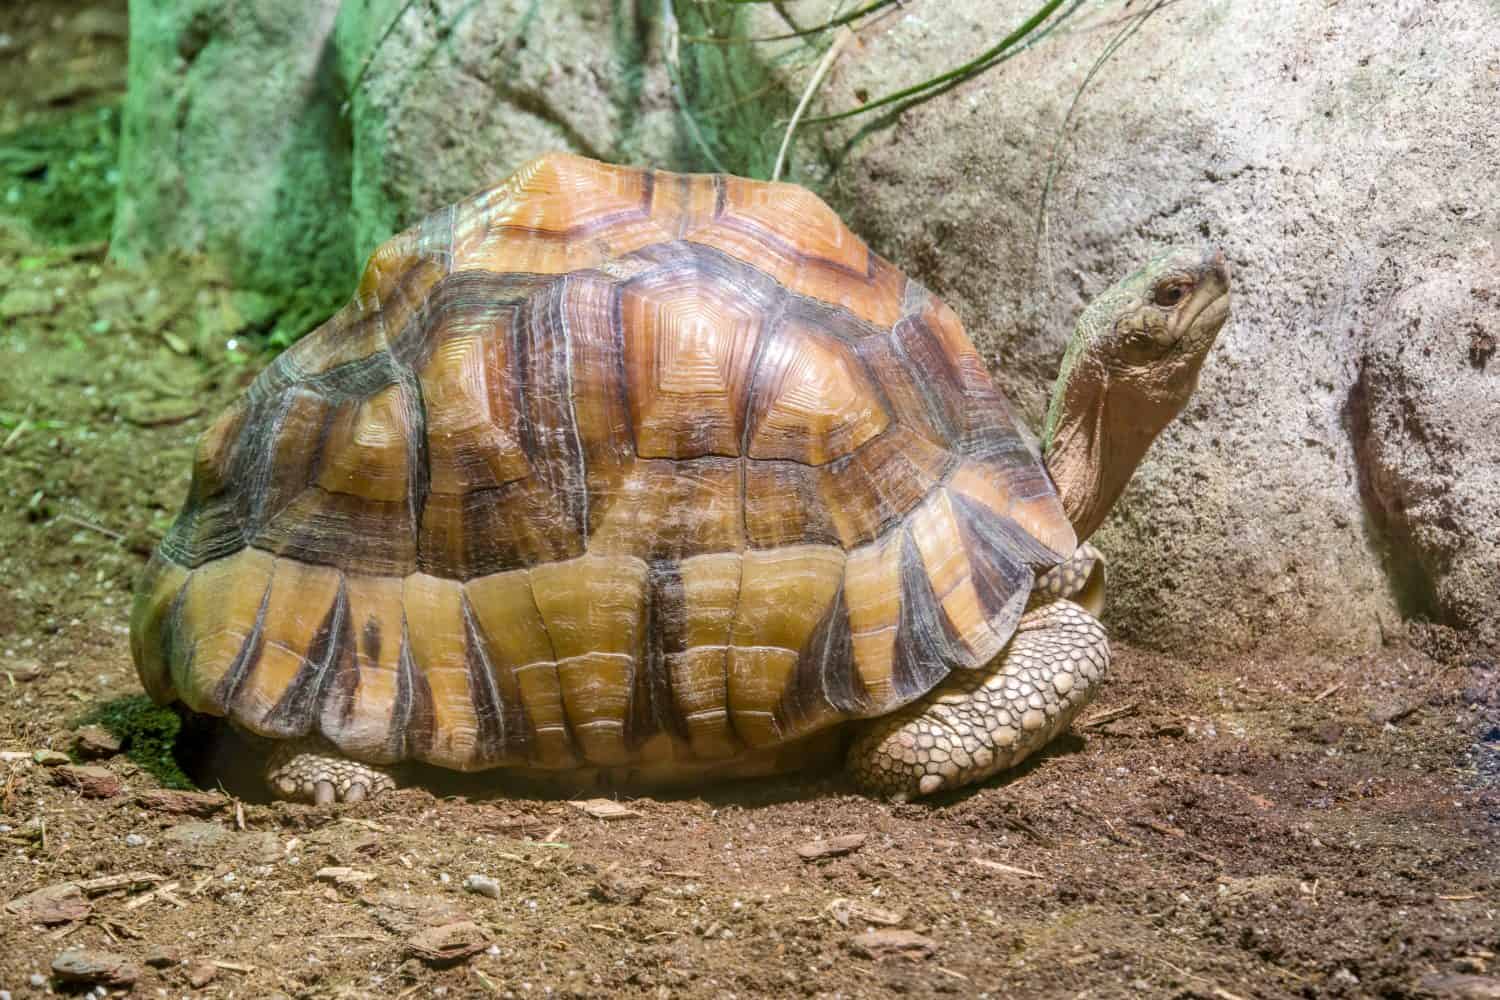 The angonoka tortoise (Astrochelys yniphora) is a critically endangered species of tortoise severely threatened by poaching for the illegal pet trade. It is endemic to Madagascar.